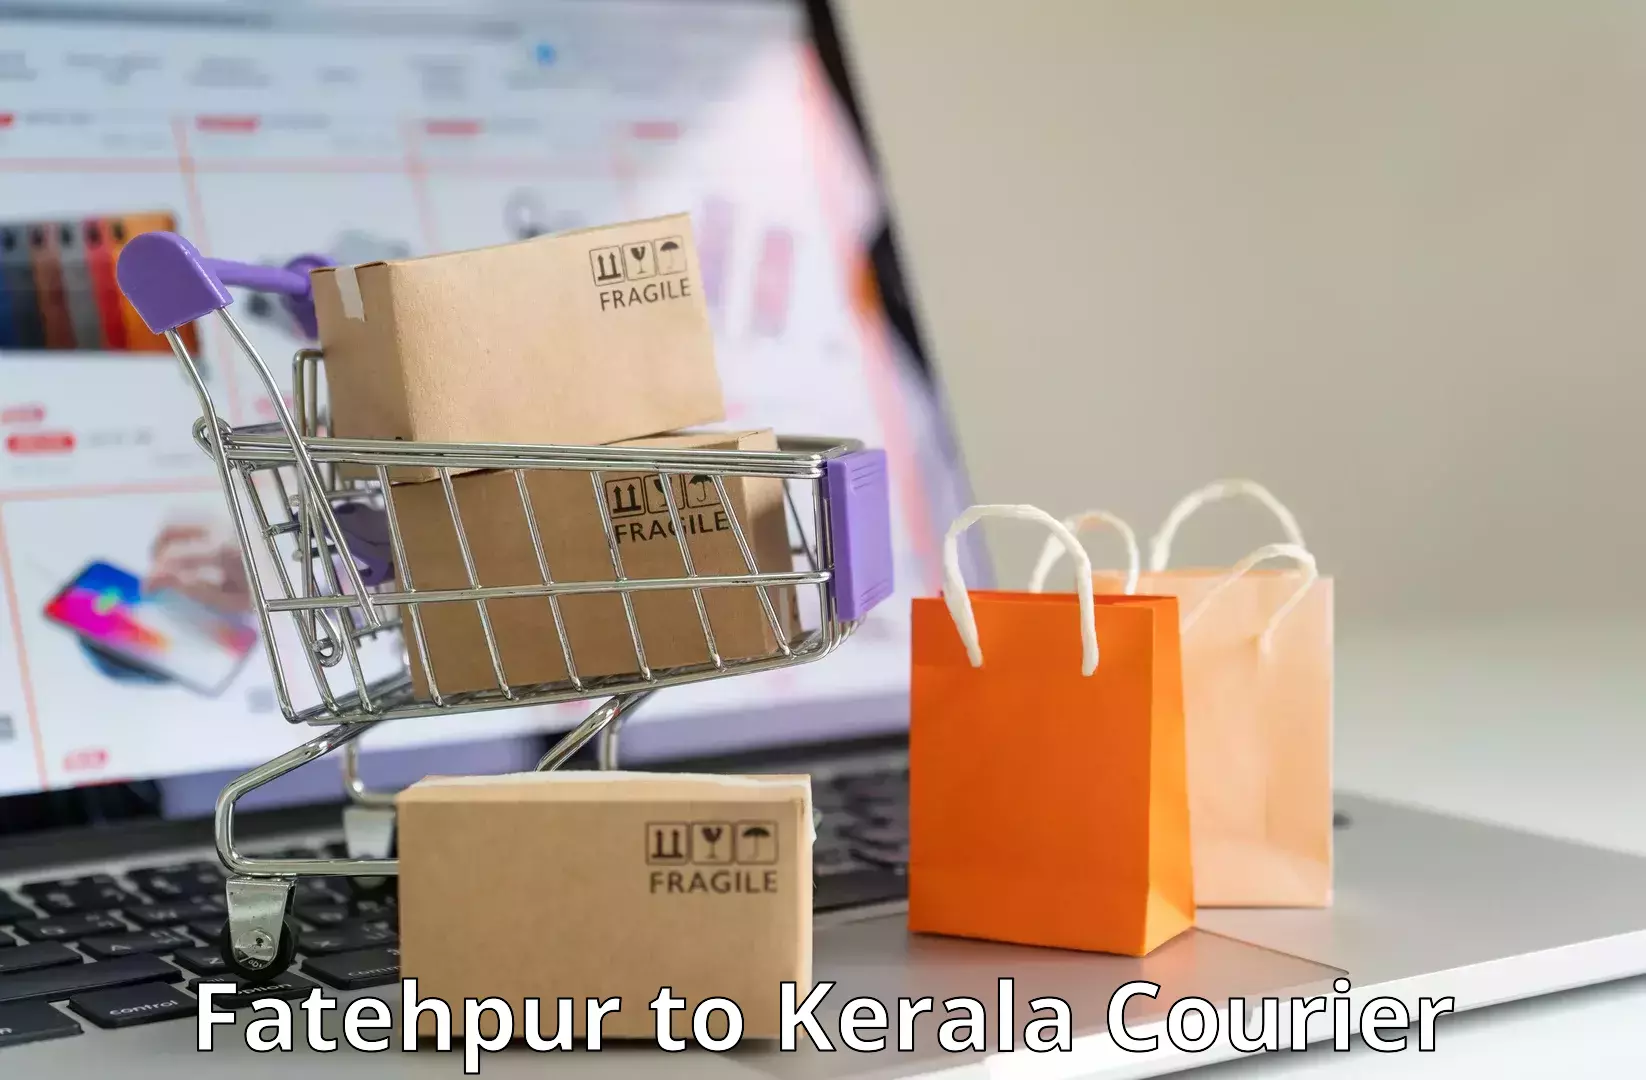 Round-the-clock parcel delivery Fatehpur to Ponekkara